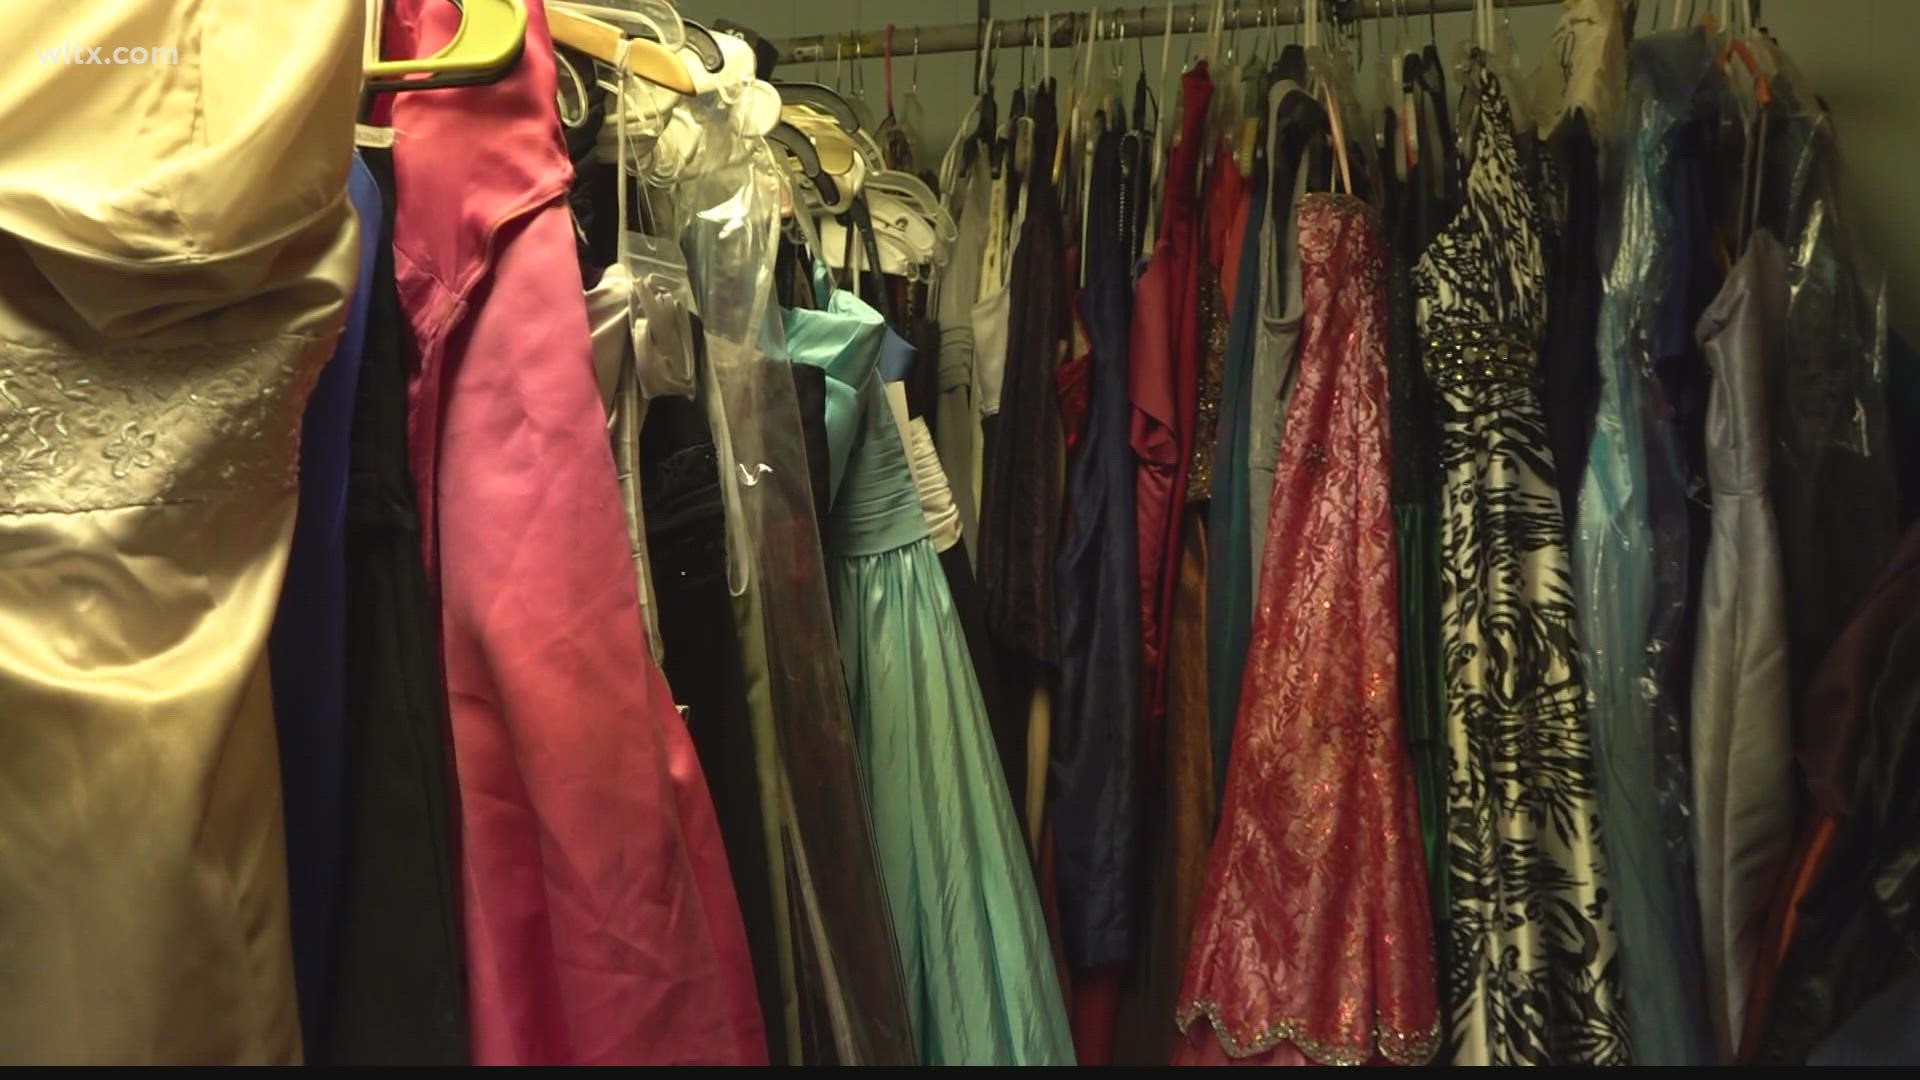 Donations of dresses, shoes and accessories help make it affordable for many high school Kershaw county girls to go to prom.